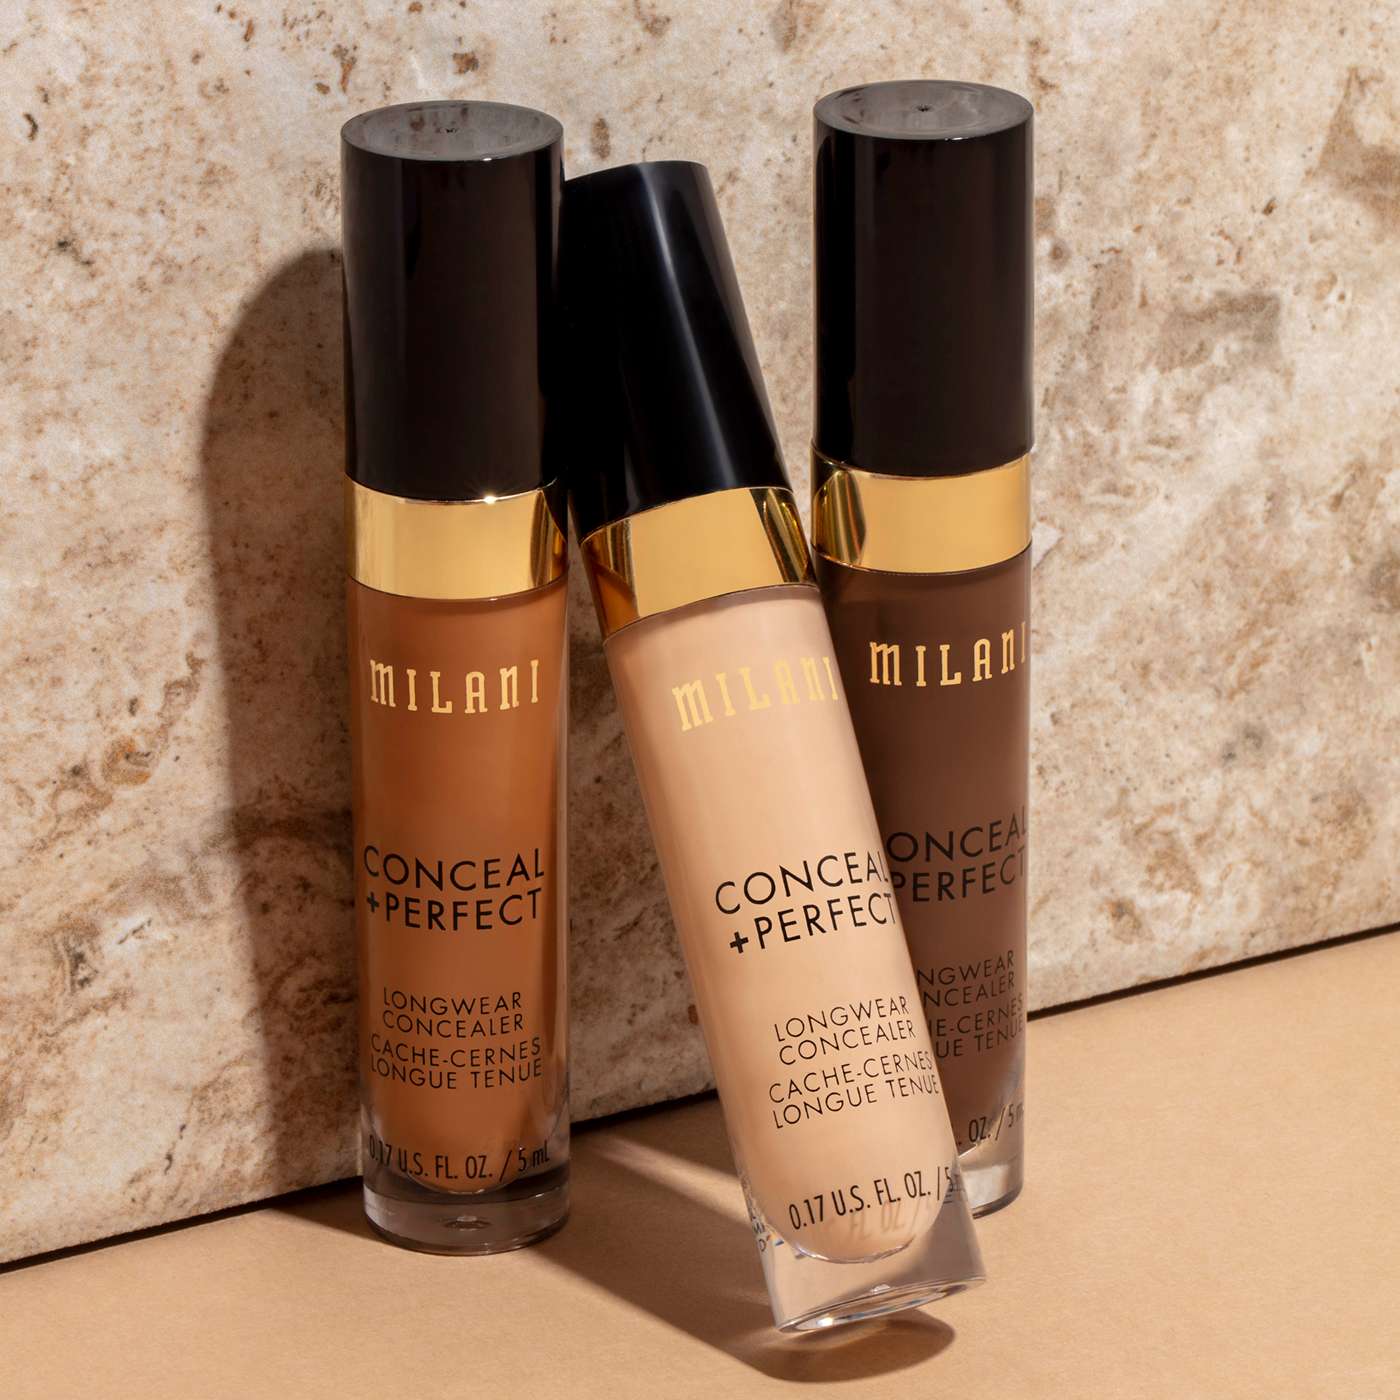 Milani Conceal +Perfect Longwear Concealer - Cool Sand; image 5 of 9